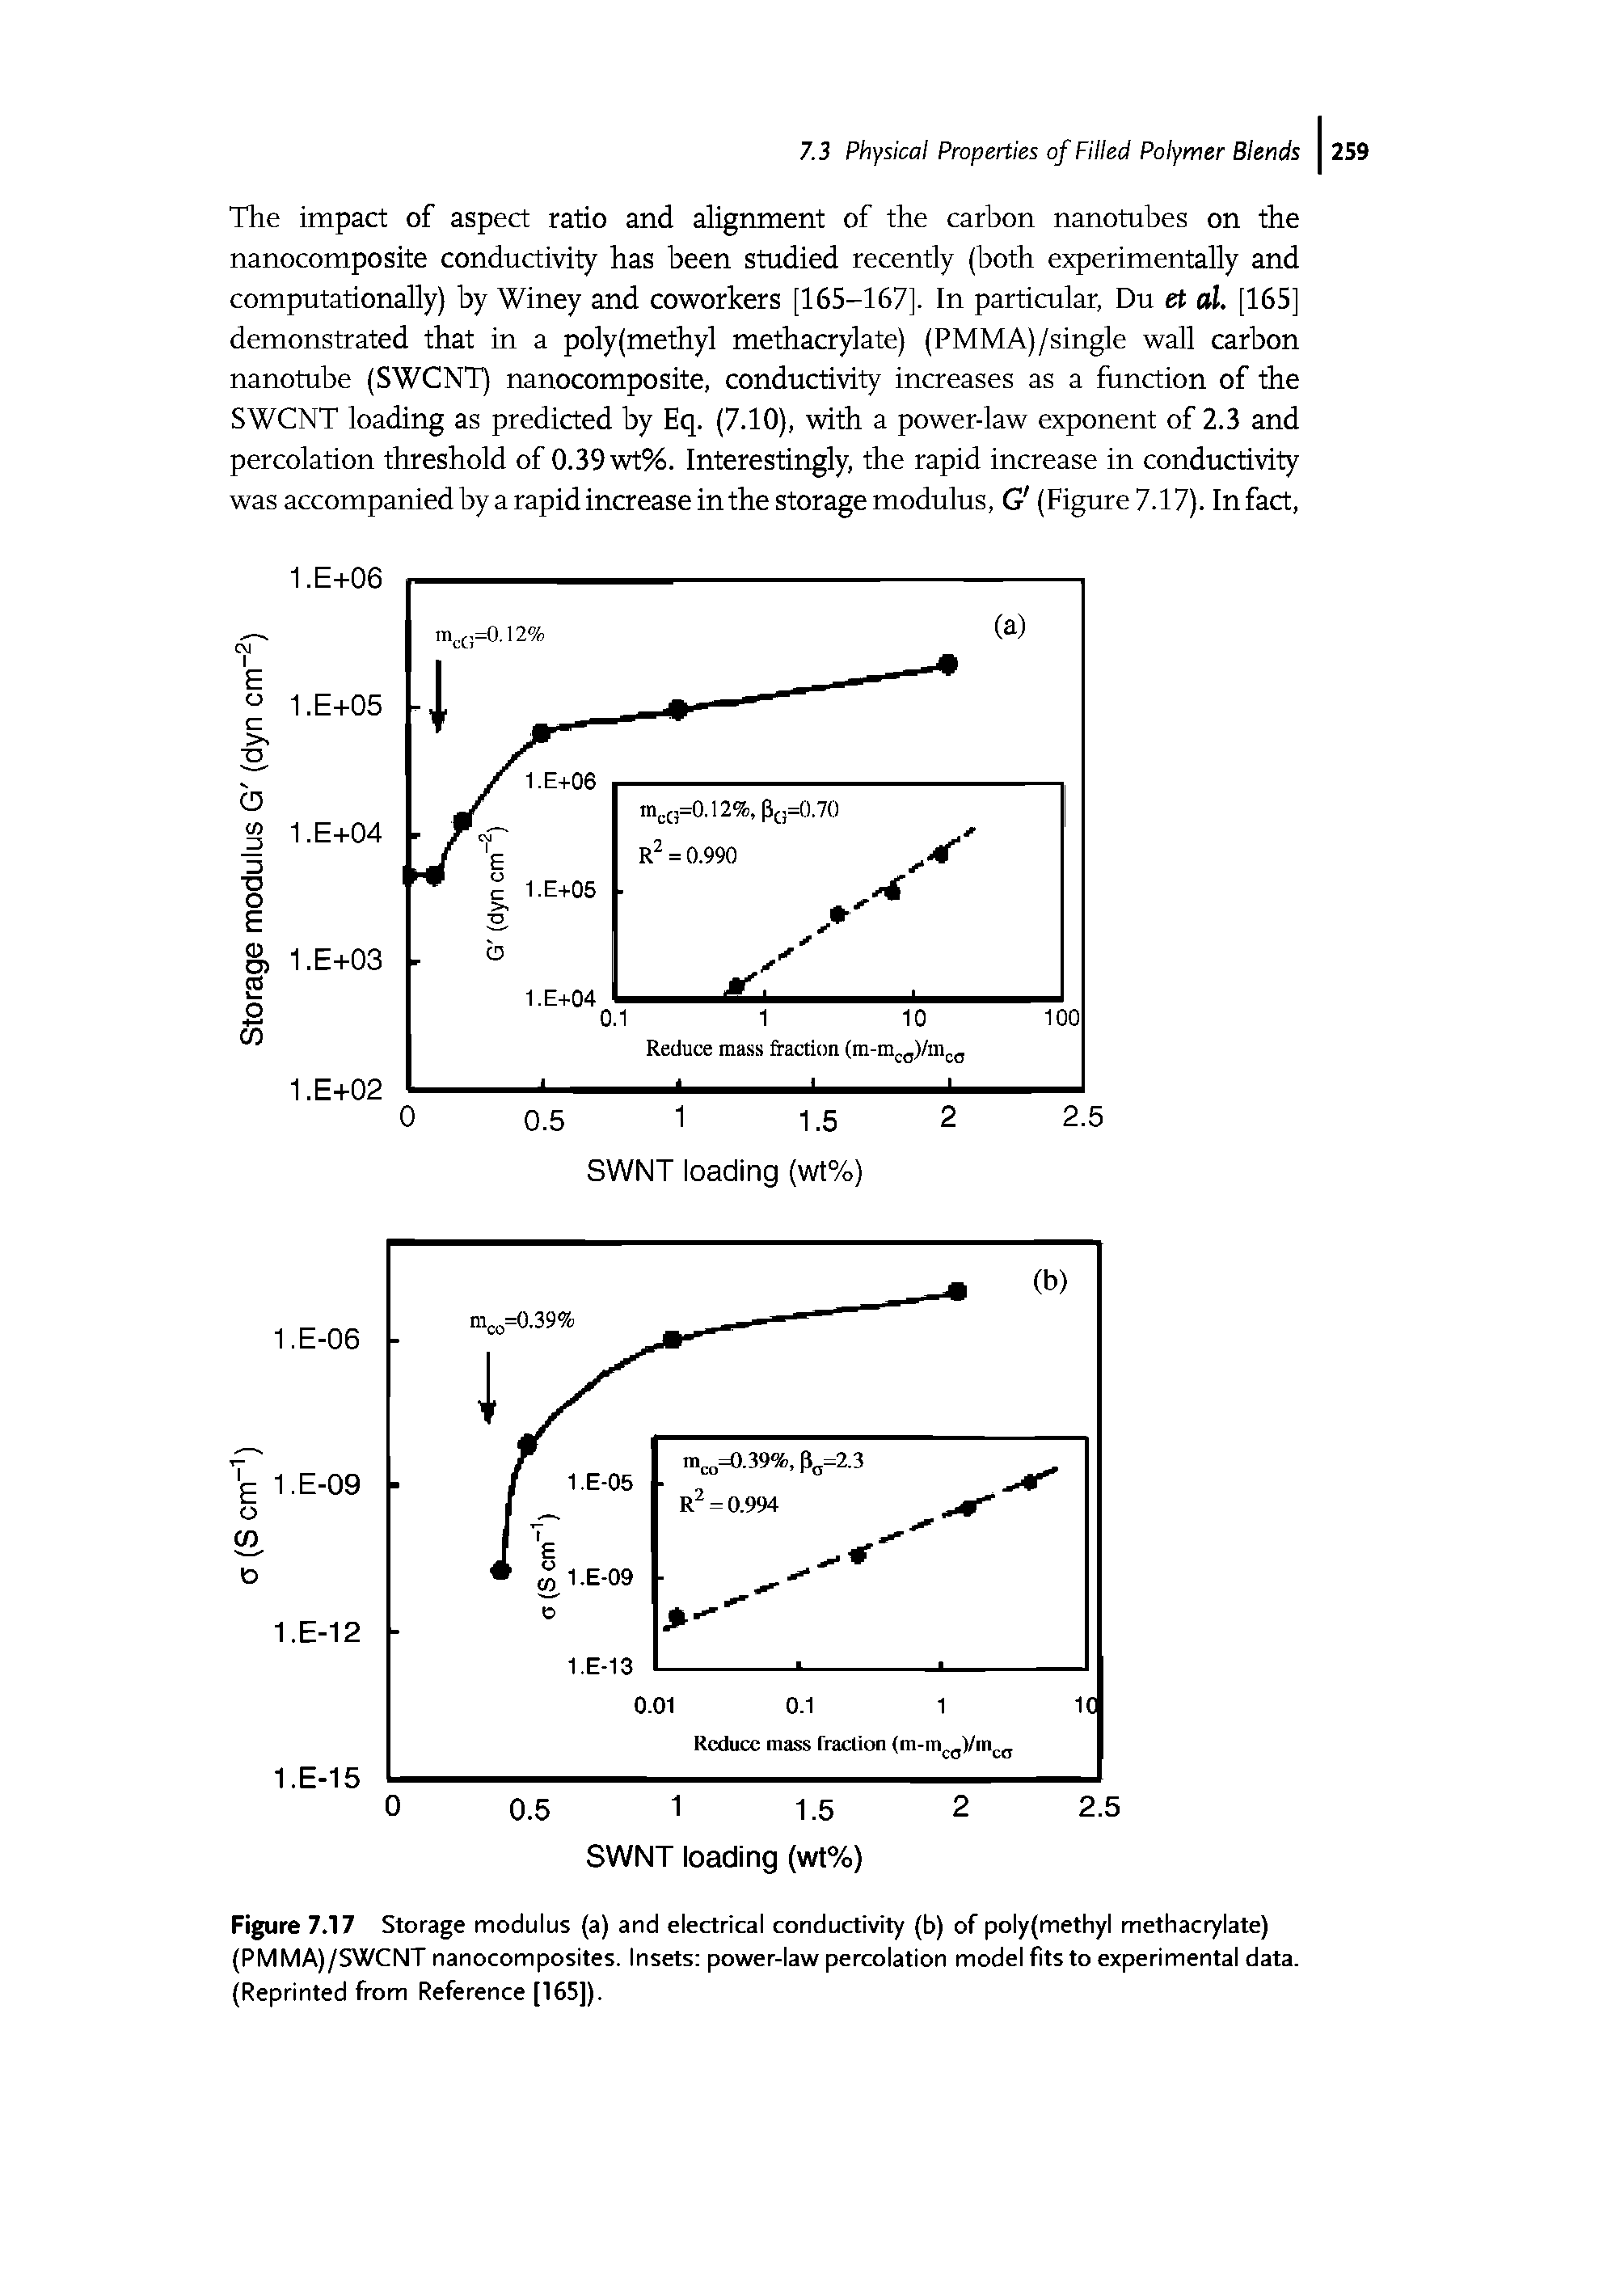 Figure 7.17 Storage modulus (a) and electrical conductivity (b) of poly(methyl methacrylate) (PMMA)/SWCNT nanocomposites. Insets power-law percolation model fits to experimental data. (Reprinted from Reference [165]).